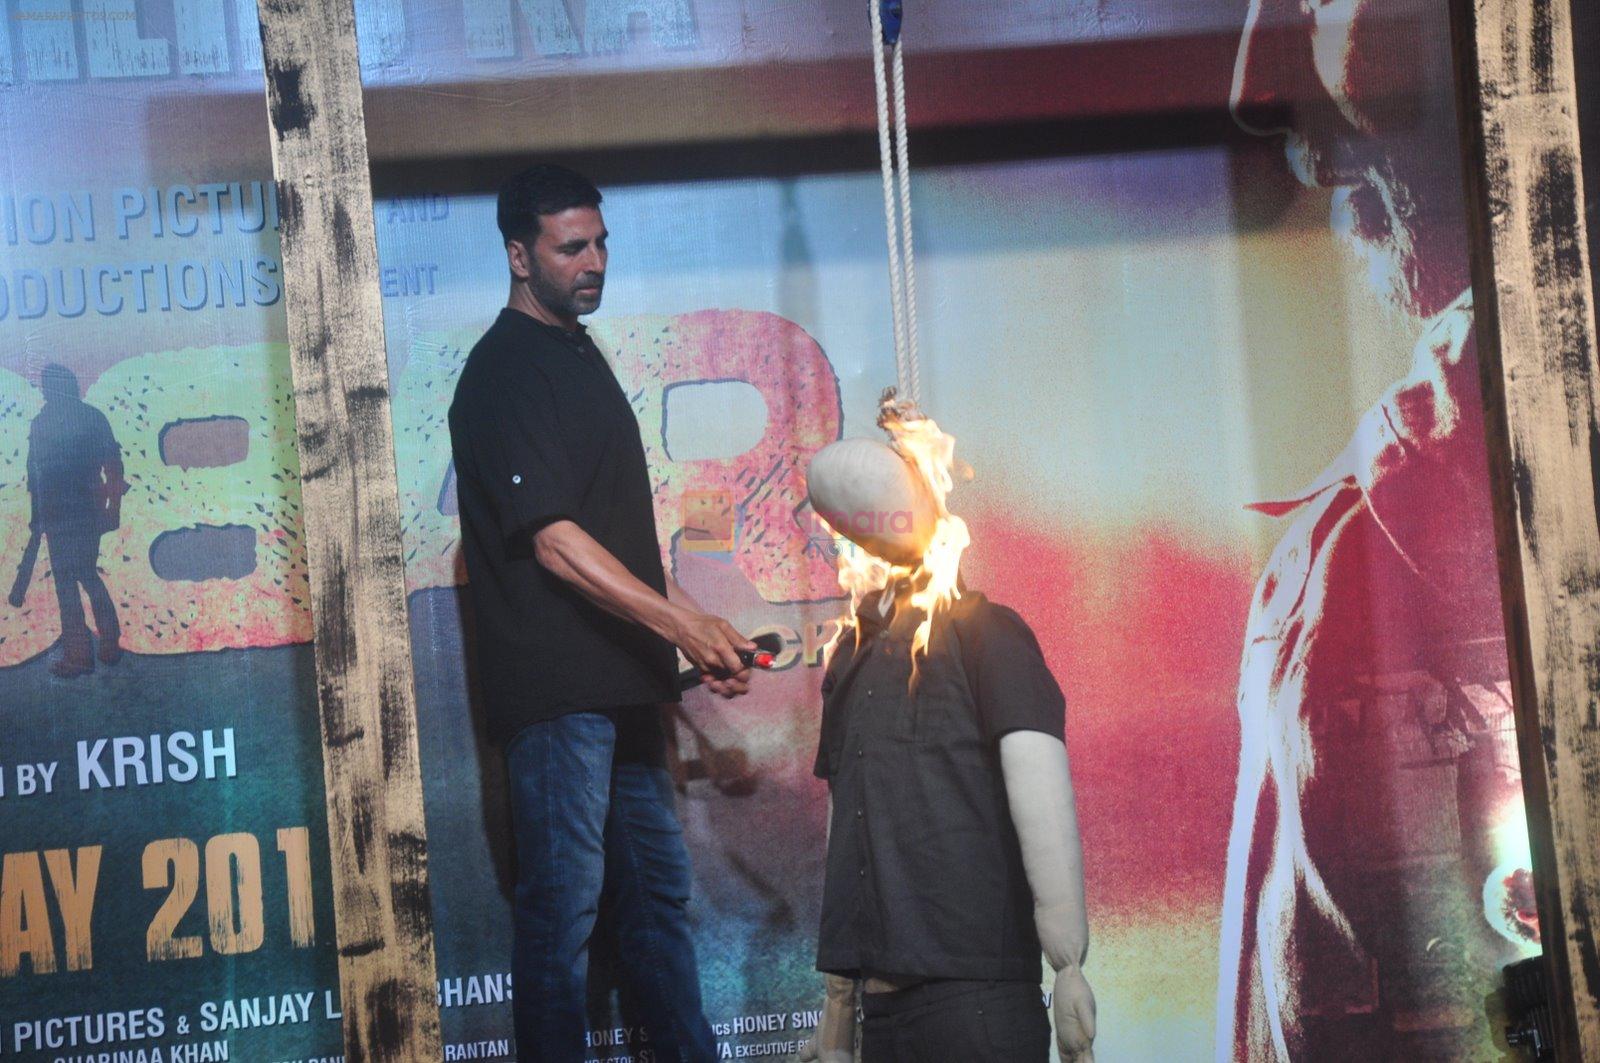 Akshay Kumar at the launch of trailer of Gabbar Is Back in Mumbai on 23rd March 2015